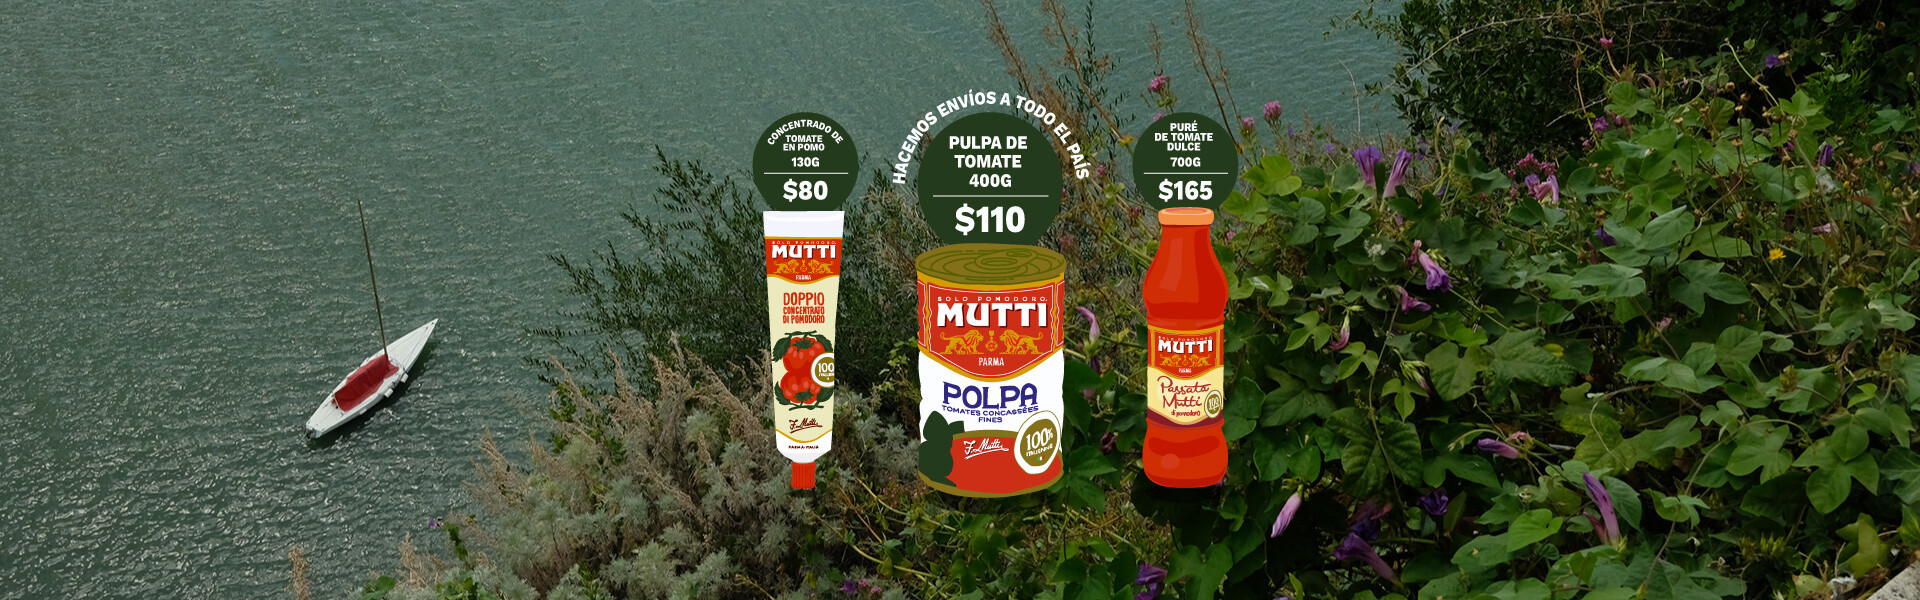 Productos Mutti